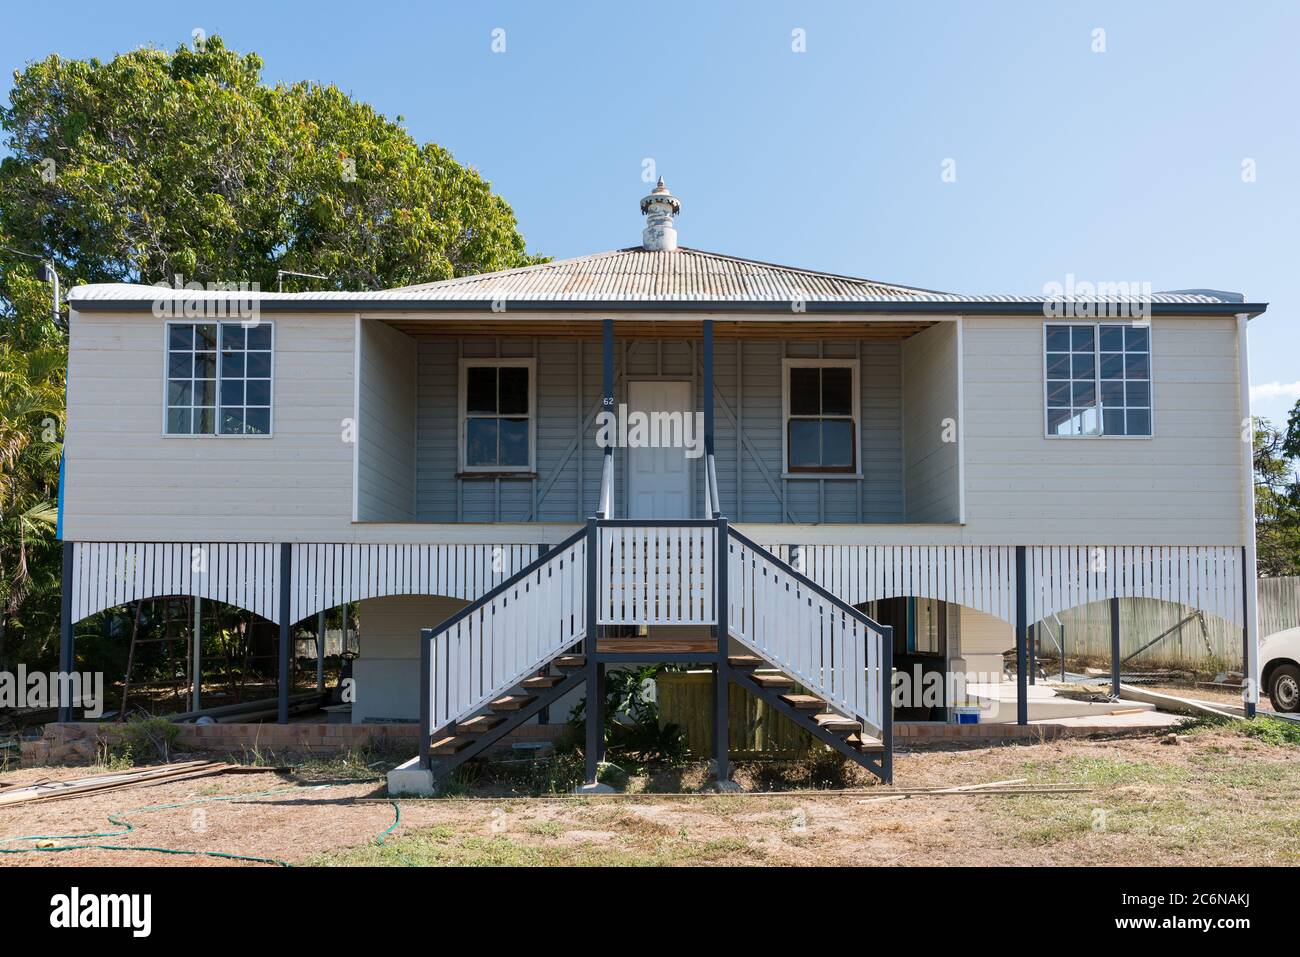 Old Queenslander style house being renovated with new stairs, walls and windows Stock Photo